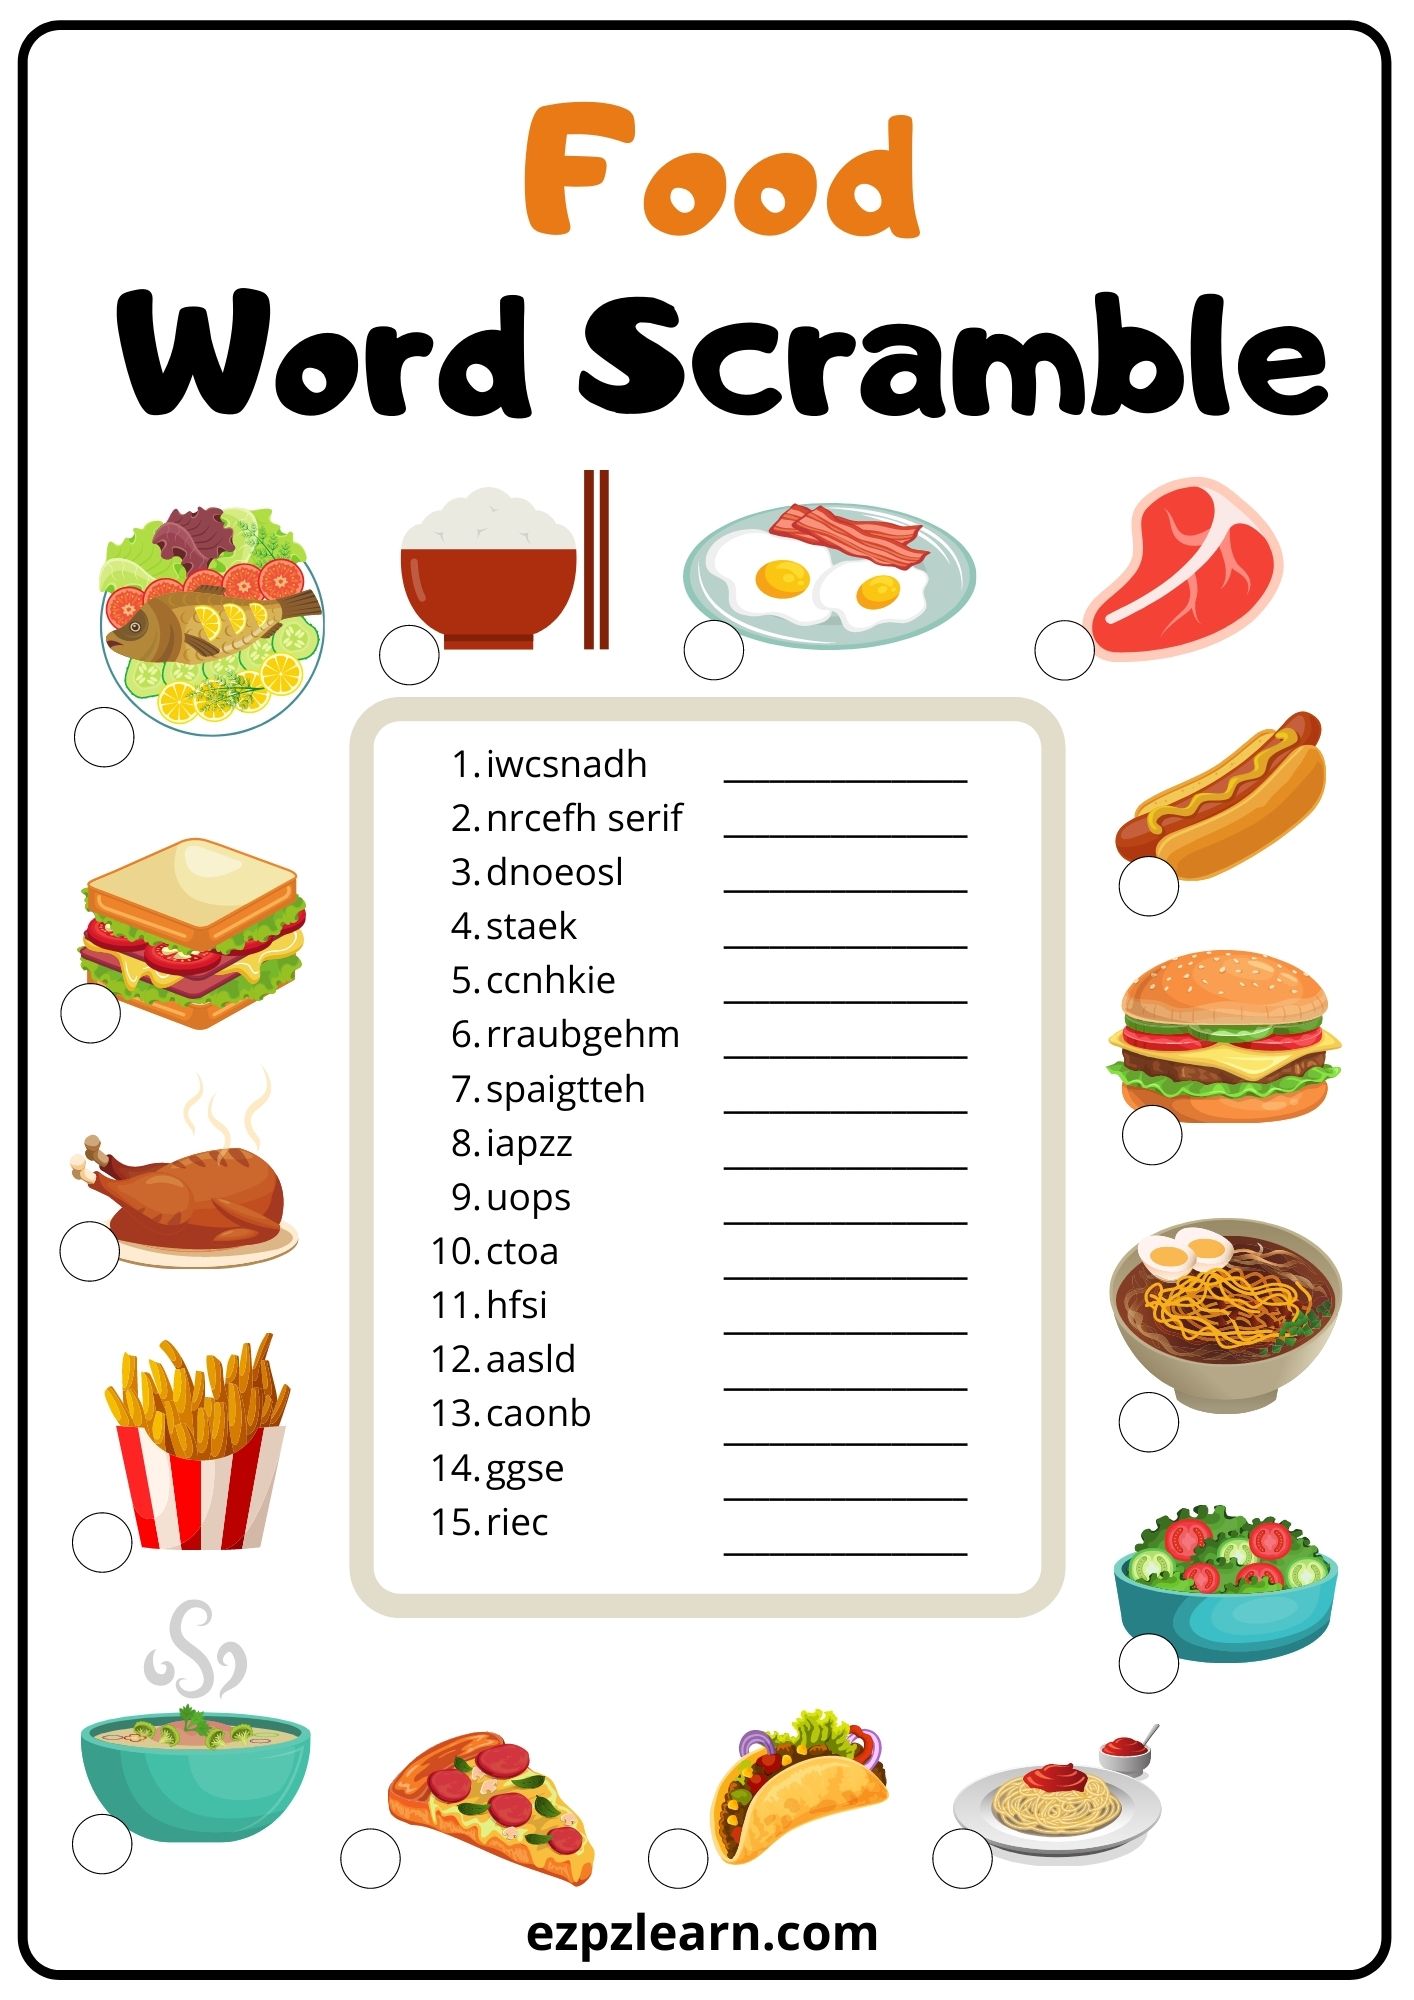 thousands-of-scramble-words-in-english-for-word-scramble-7esl